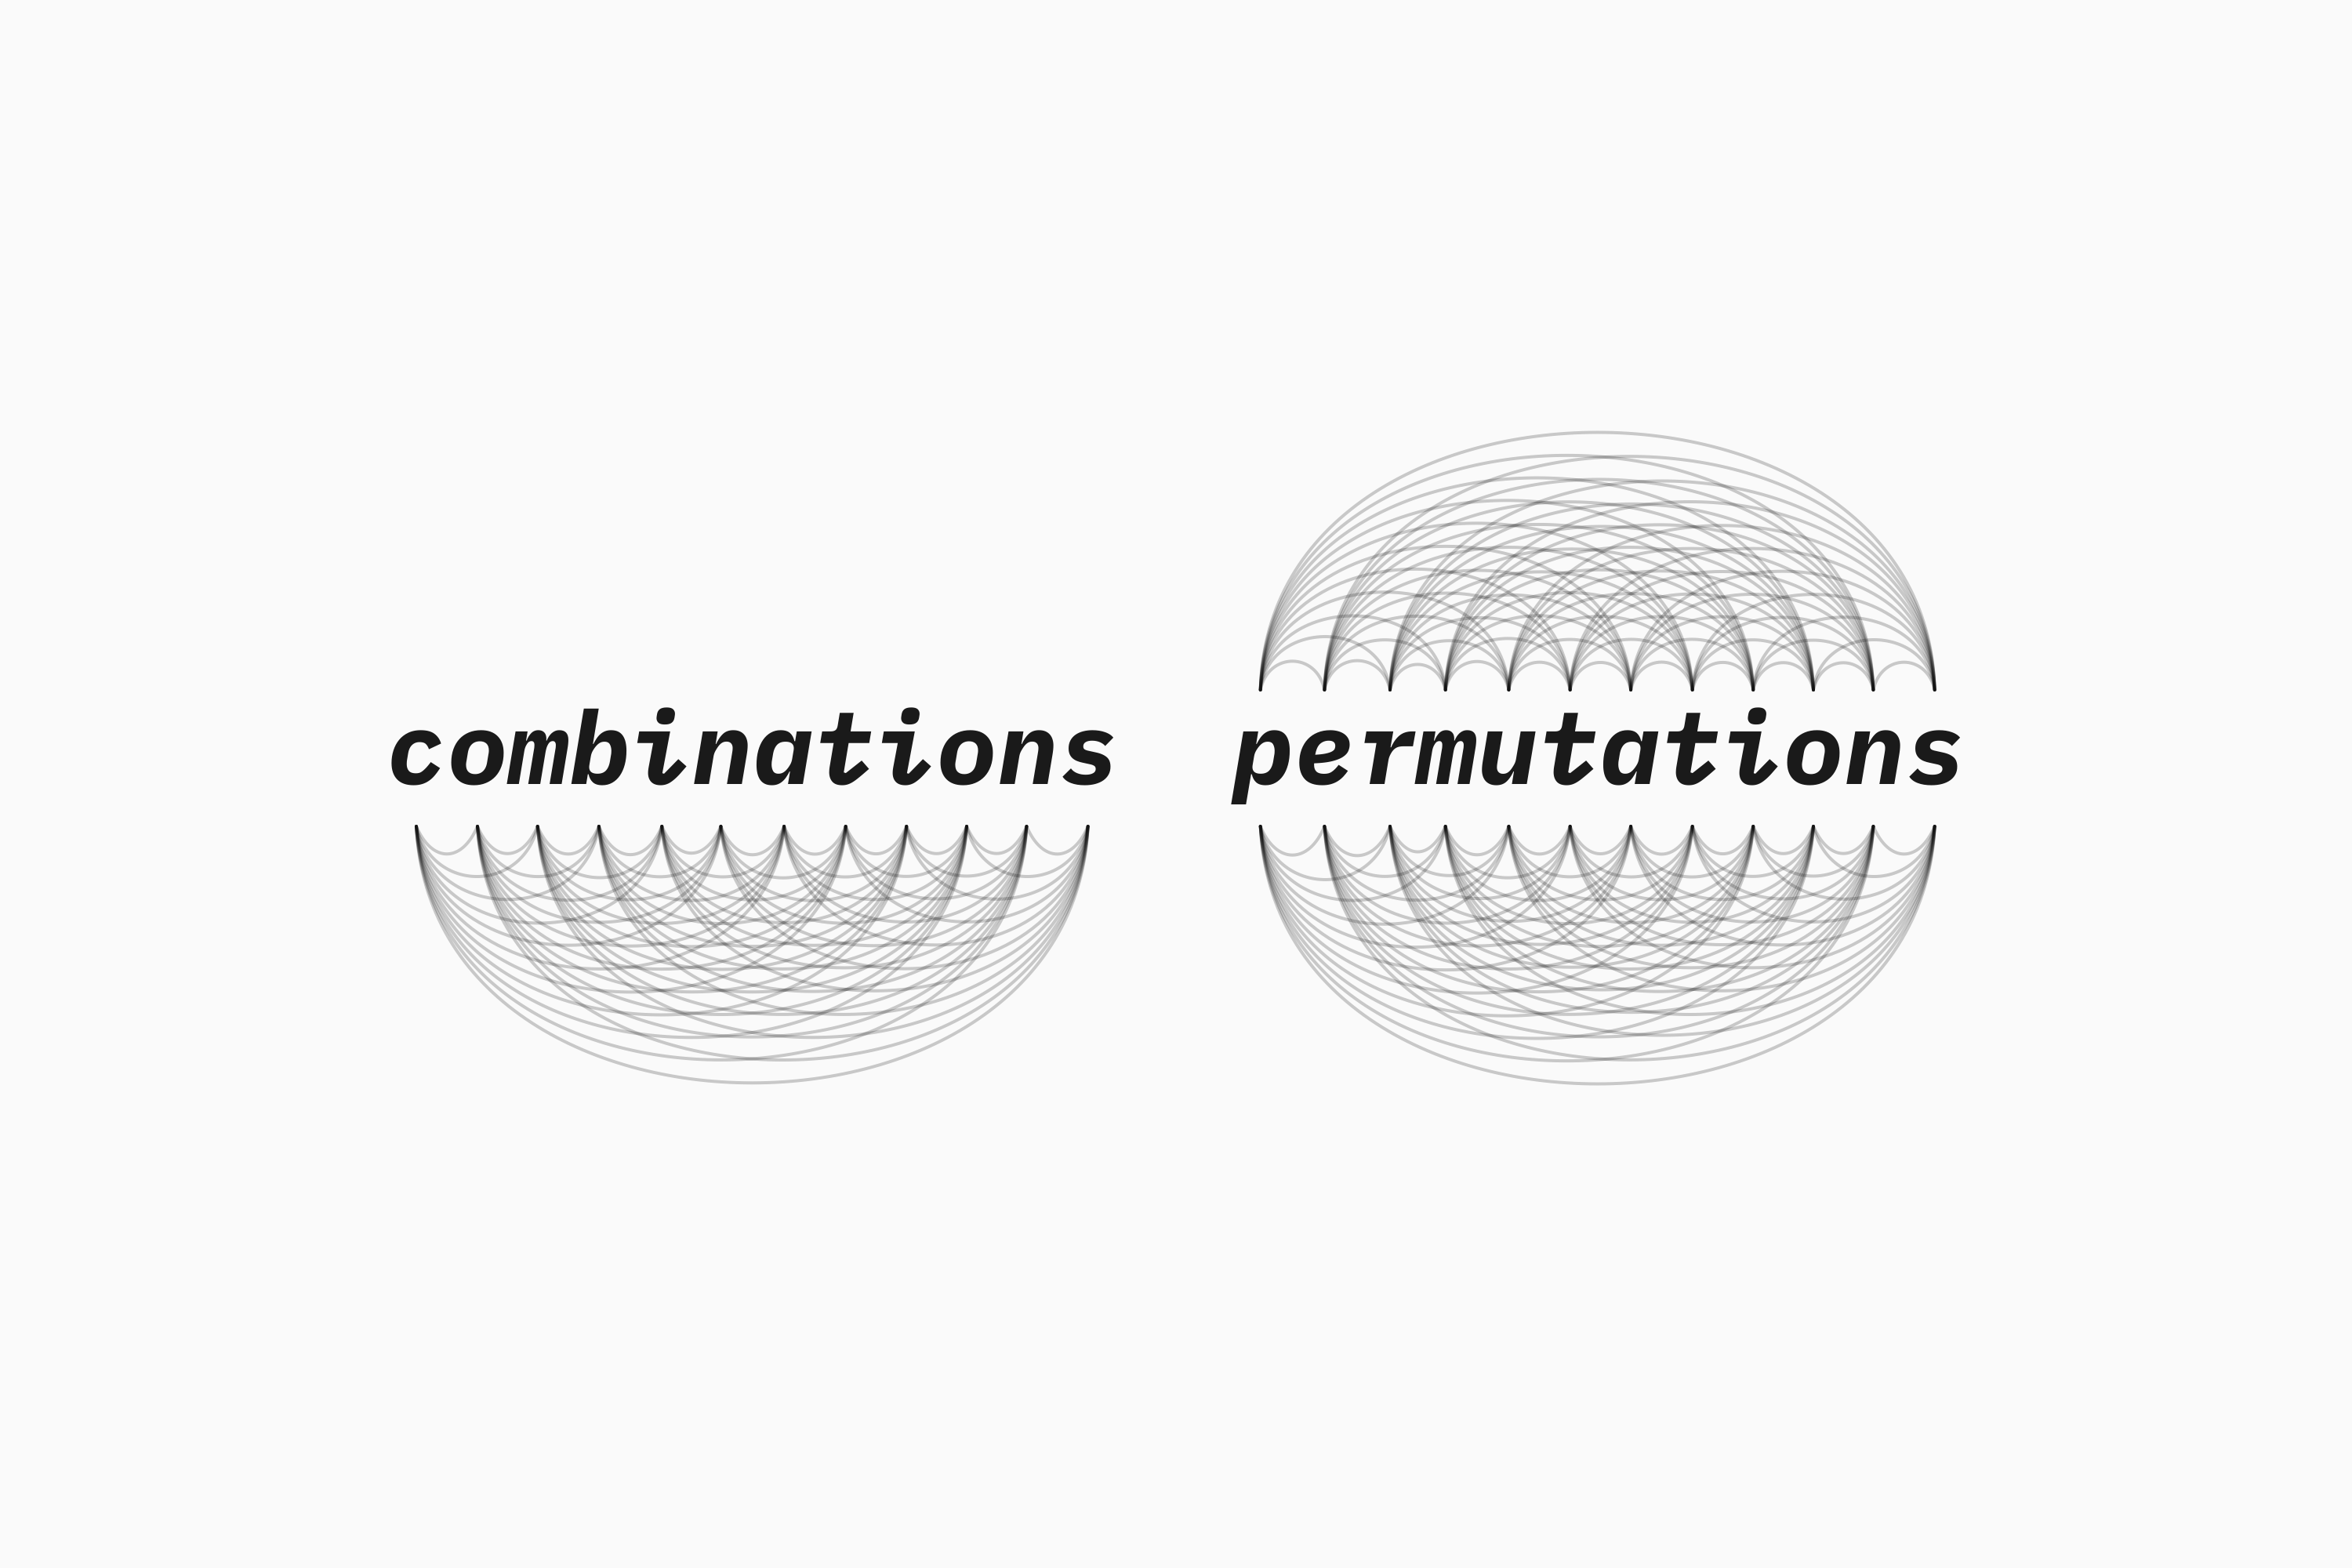 Combinations and permutations